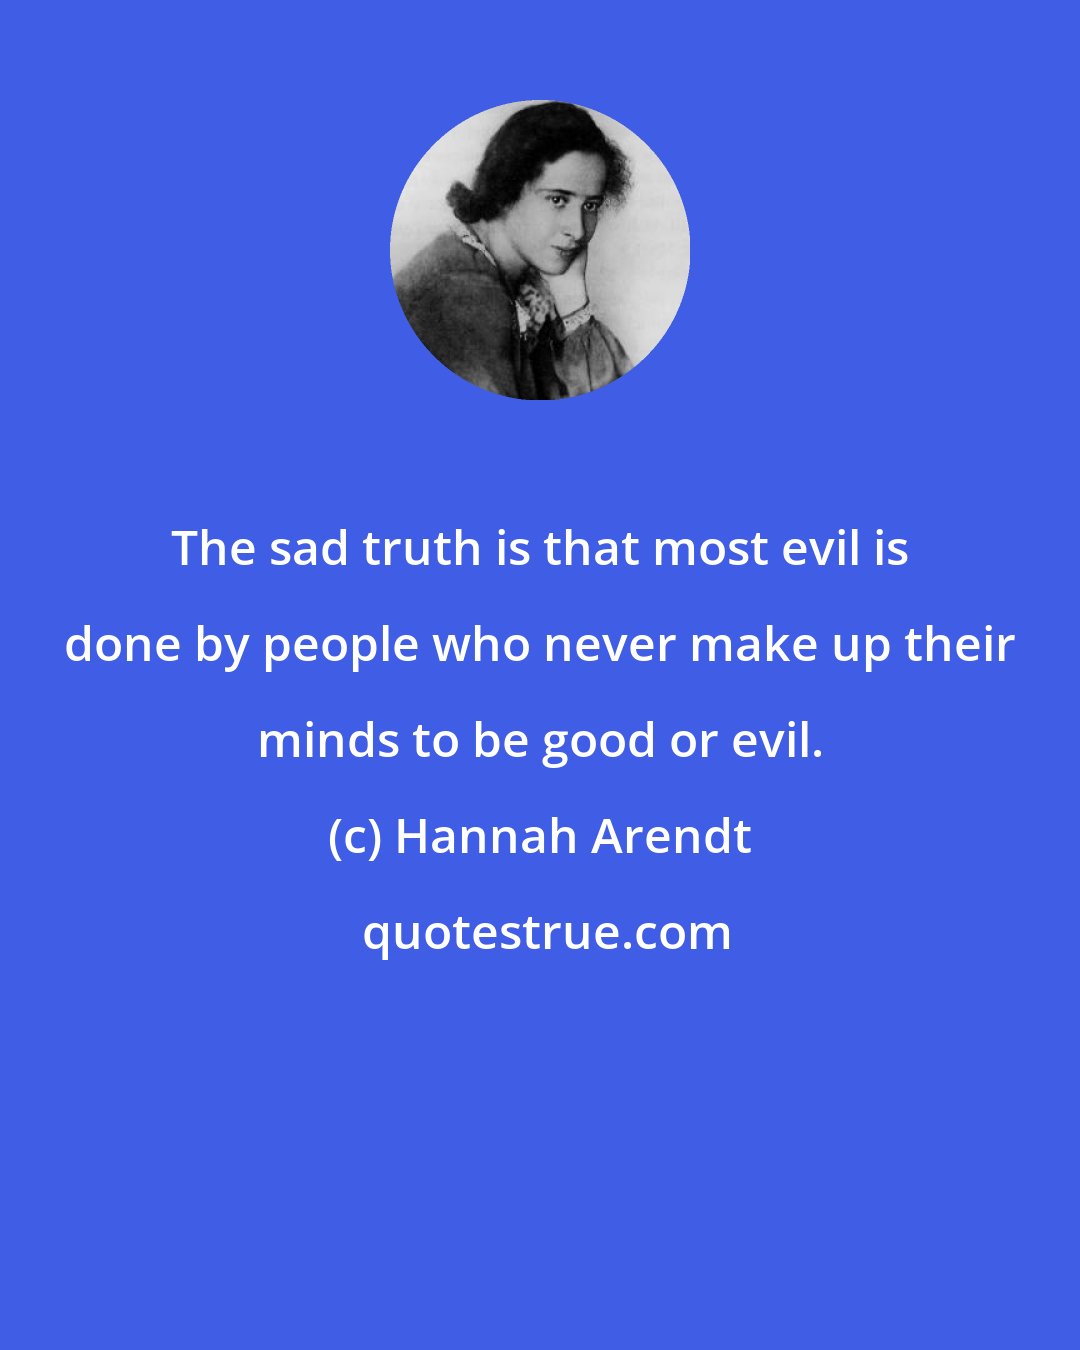 Hannah Arendt: The sad truth is that most evil is done by people who never make up their minds to be good or evil.